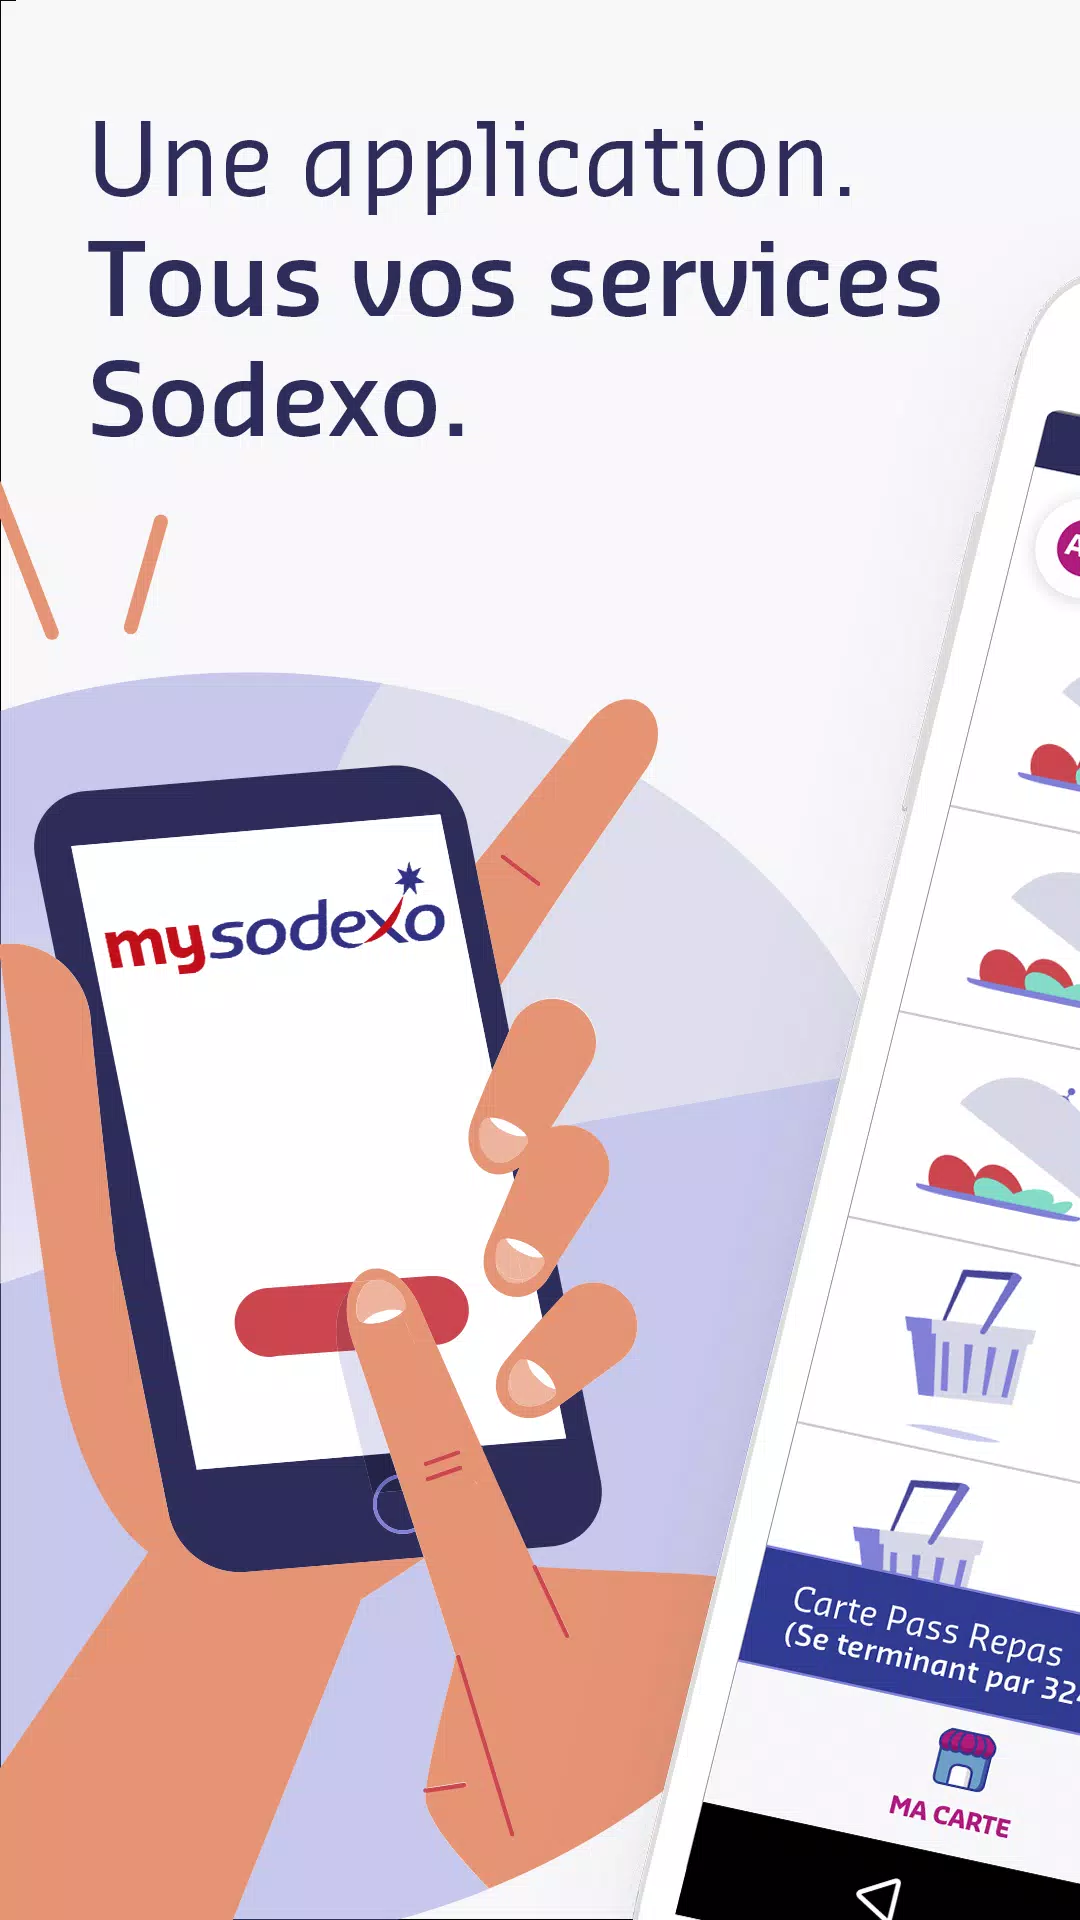 MySodexo Tunisie for Android - APK Download